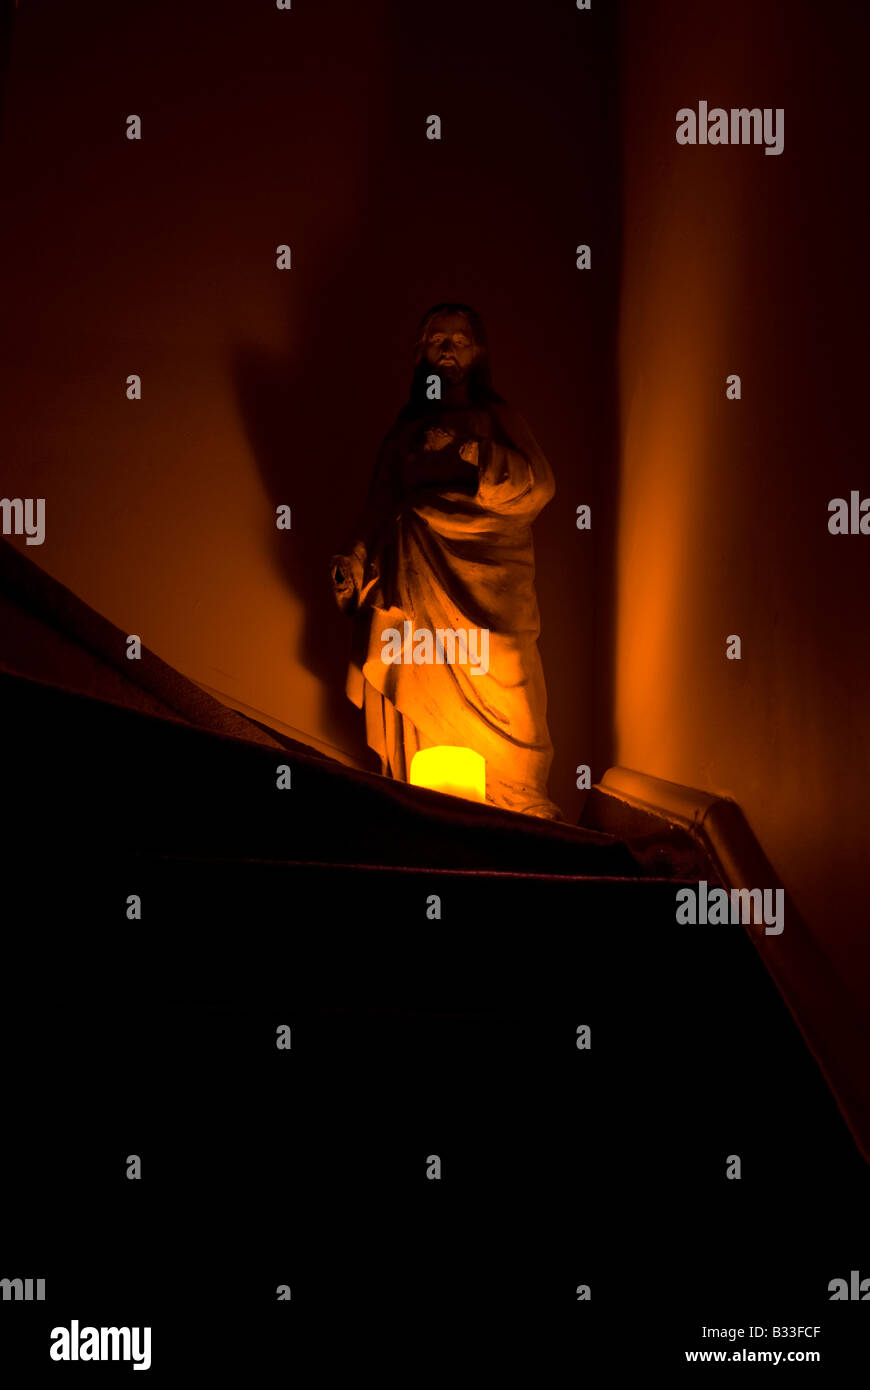 Looking up stairs at a atmospheric shadowy statue of Jesus Christ in amber orange candle glow Stock Photo